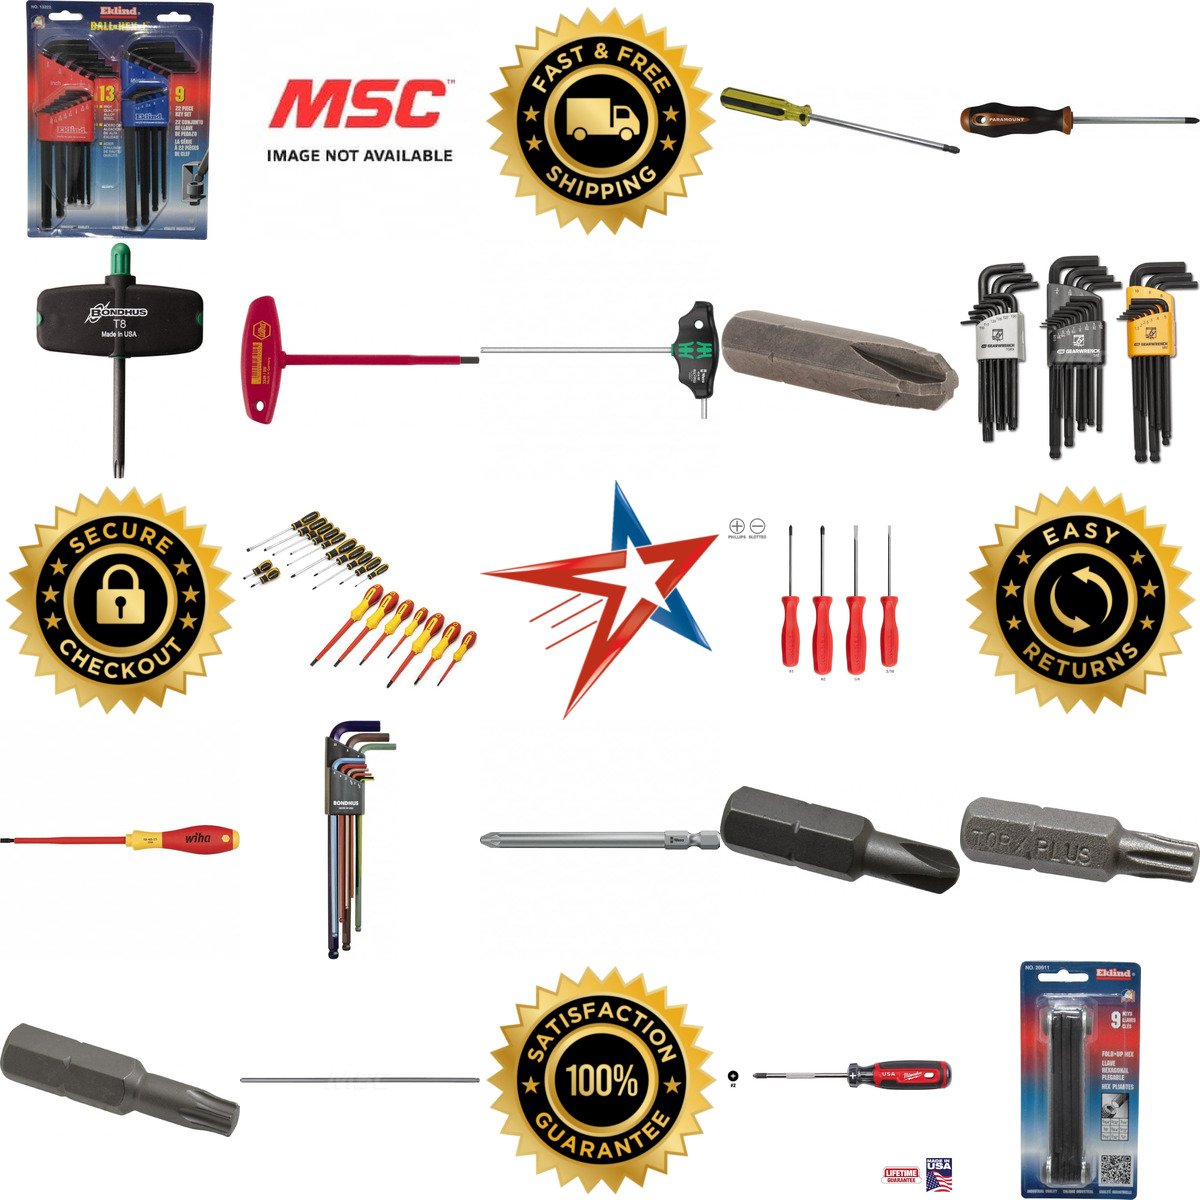 A selection of Screwdrivers and Hex Keys products on GoVets